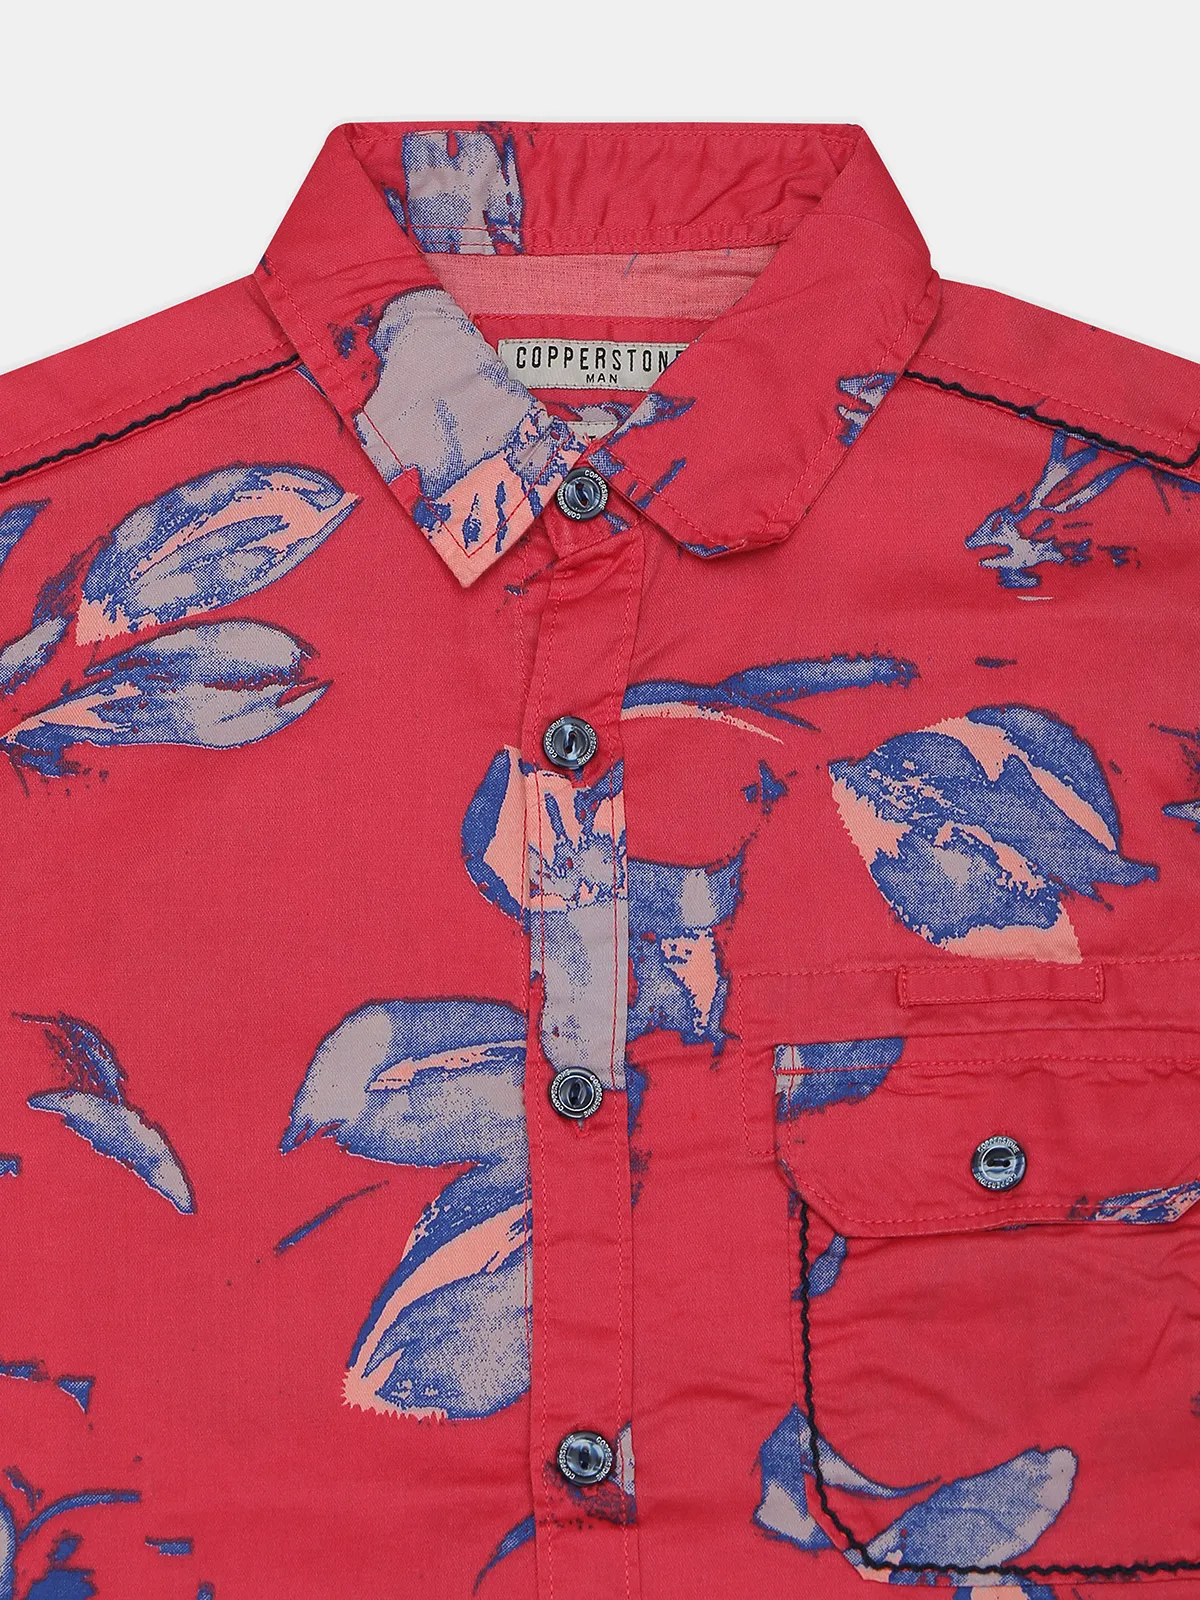 Copperstone pink printed cotton shirt